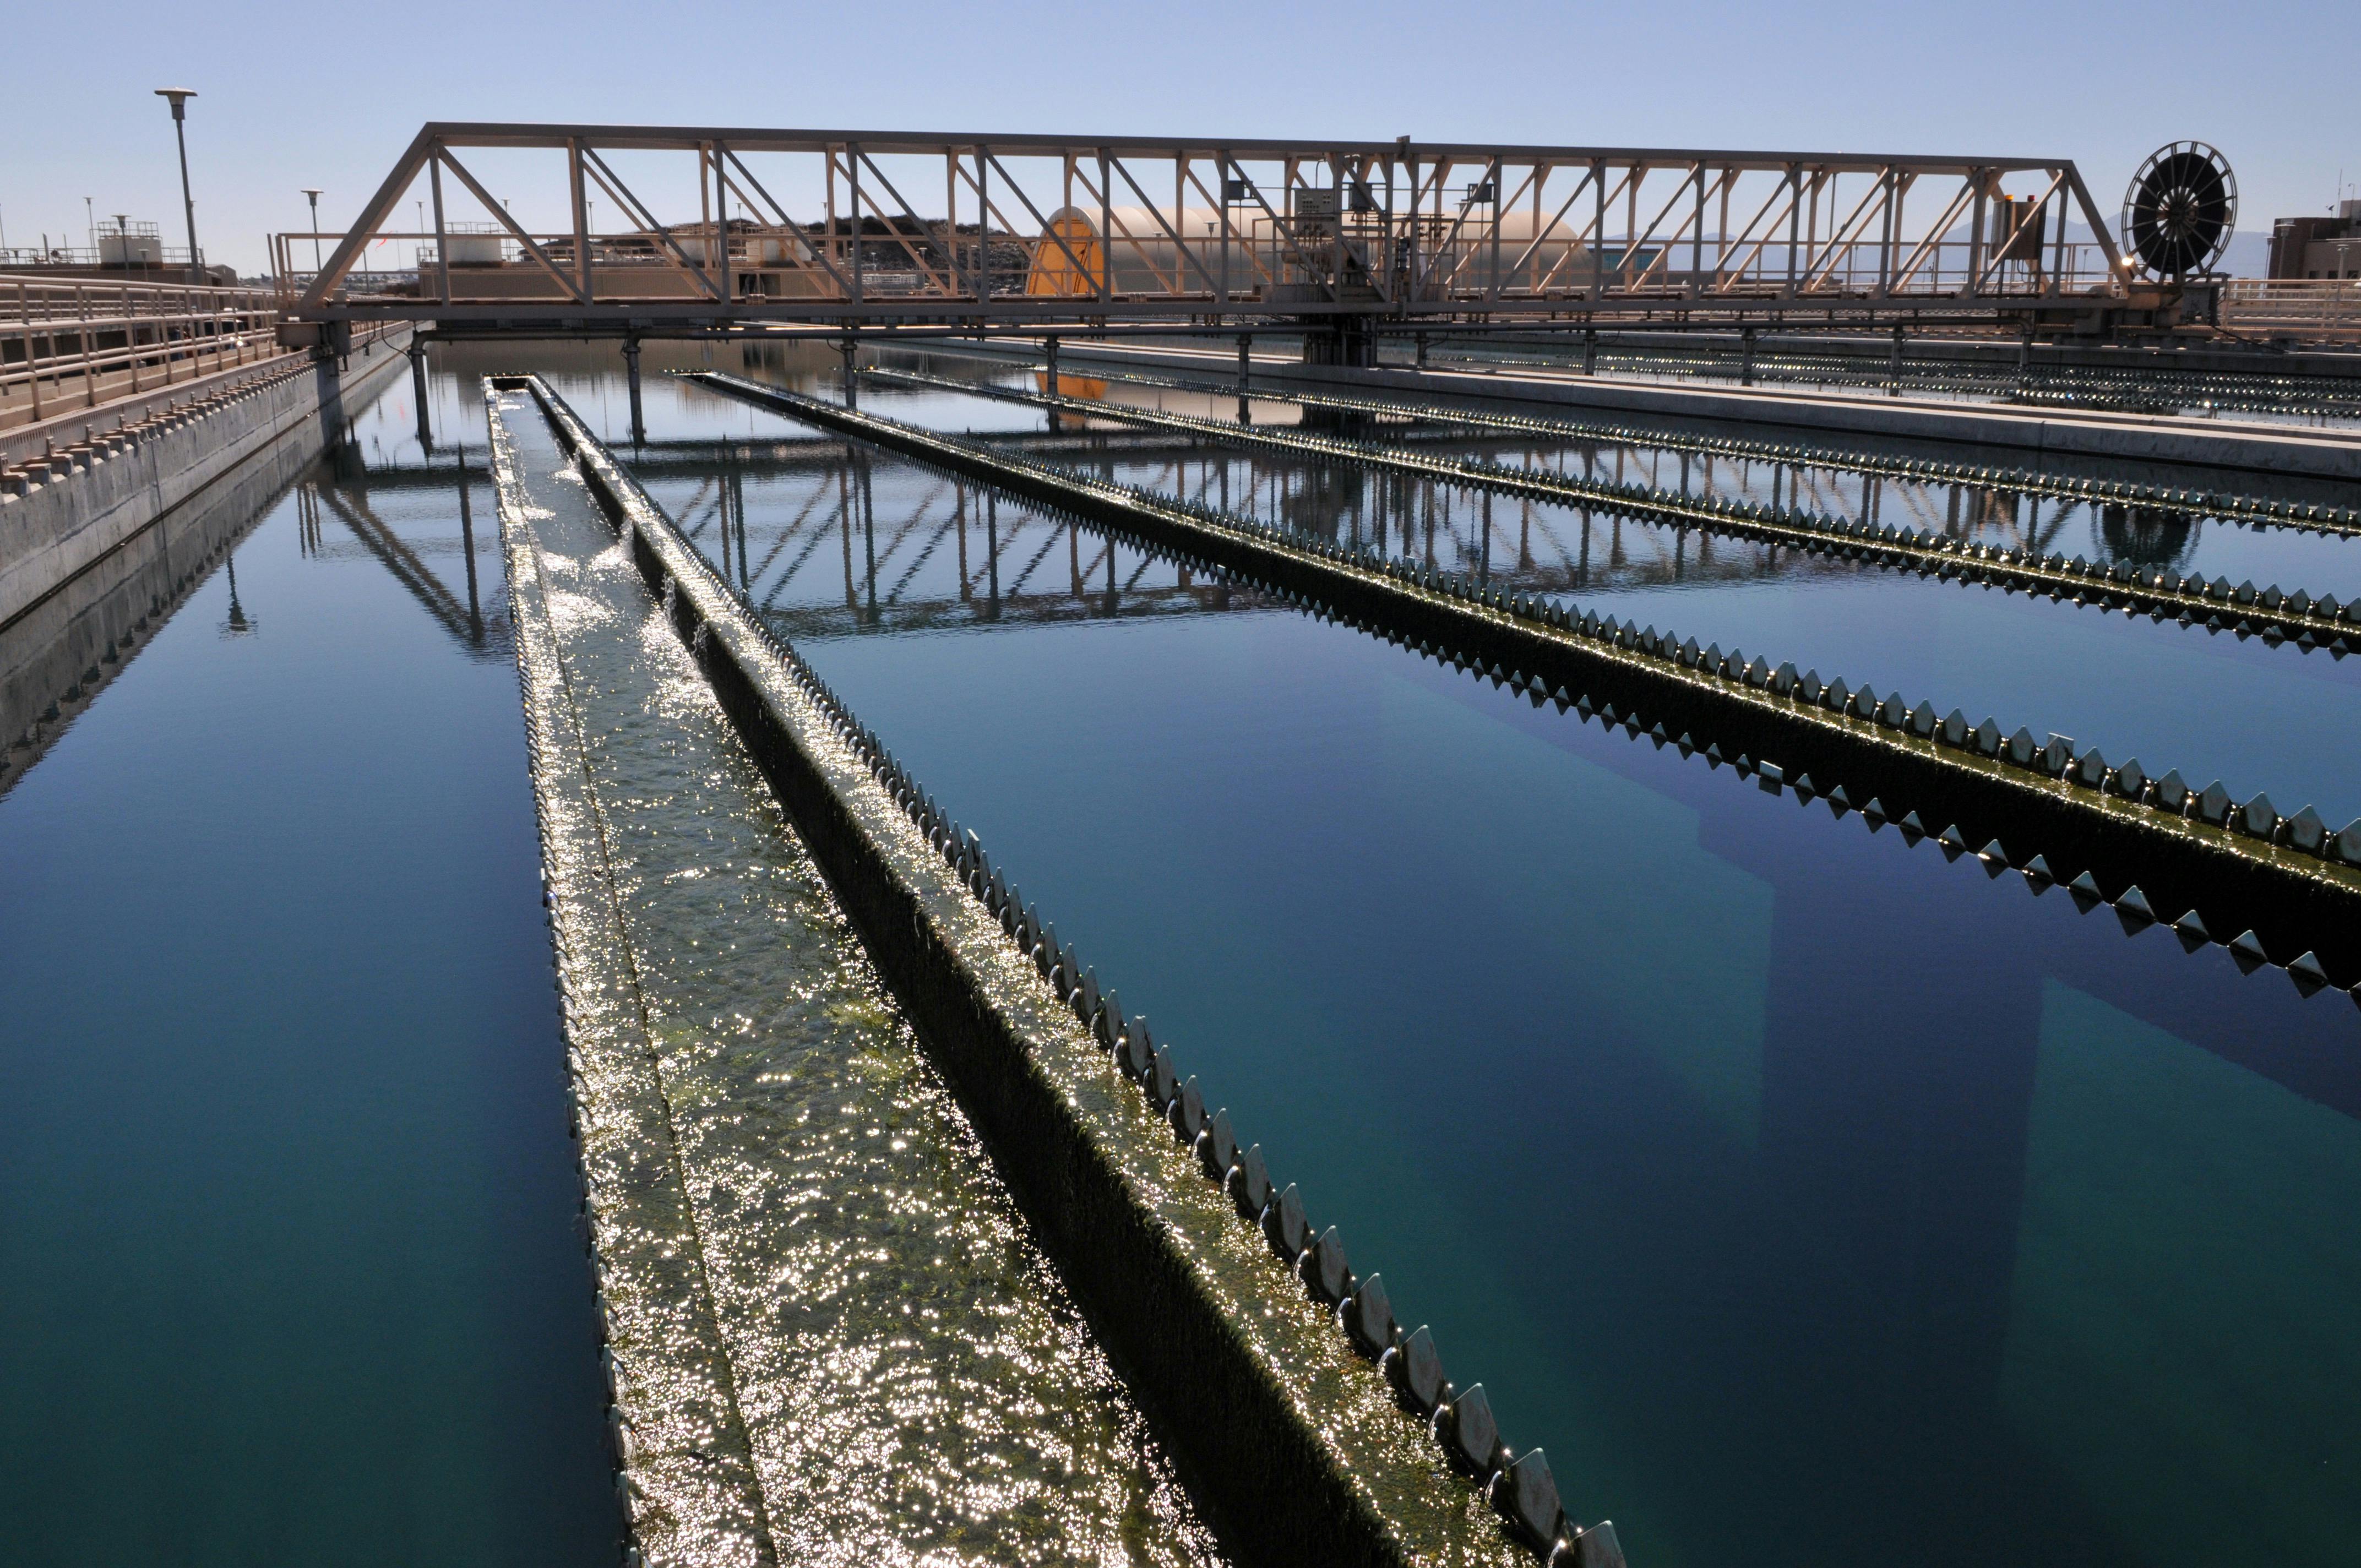 Free stock photo of Water treatment